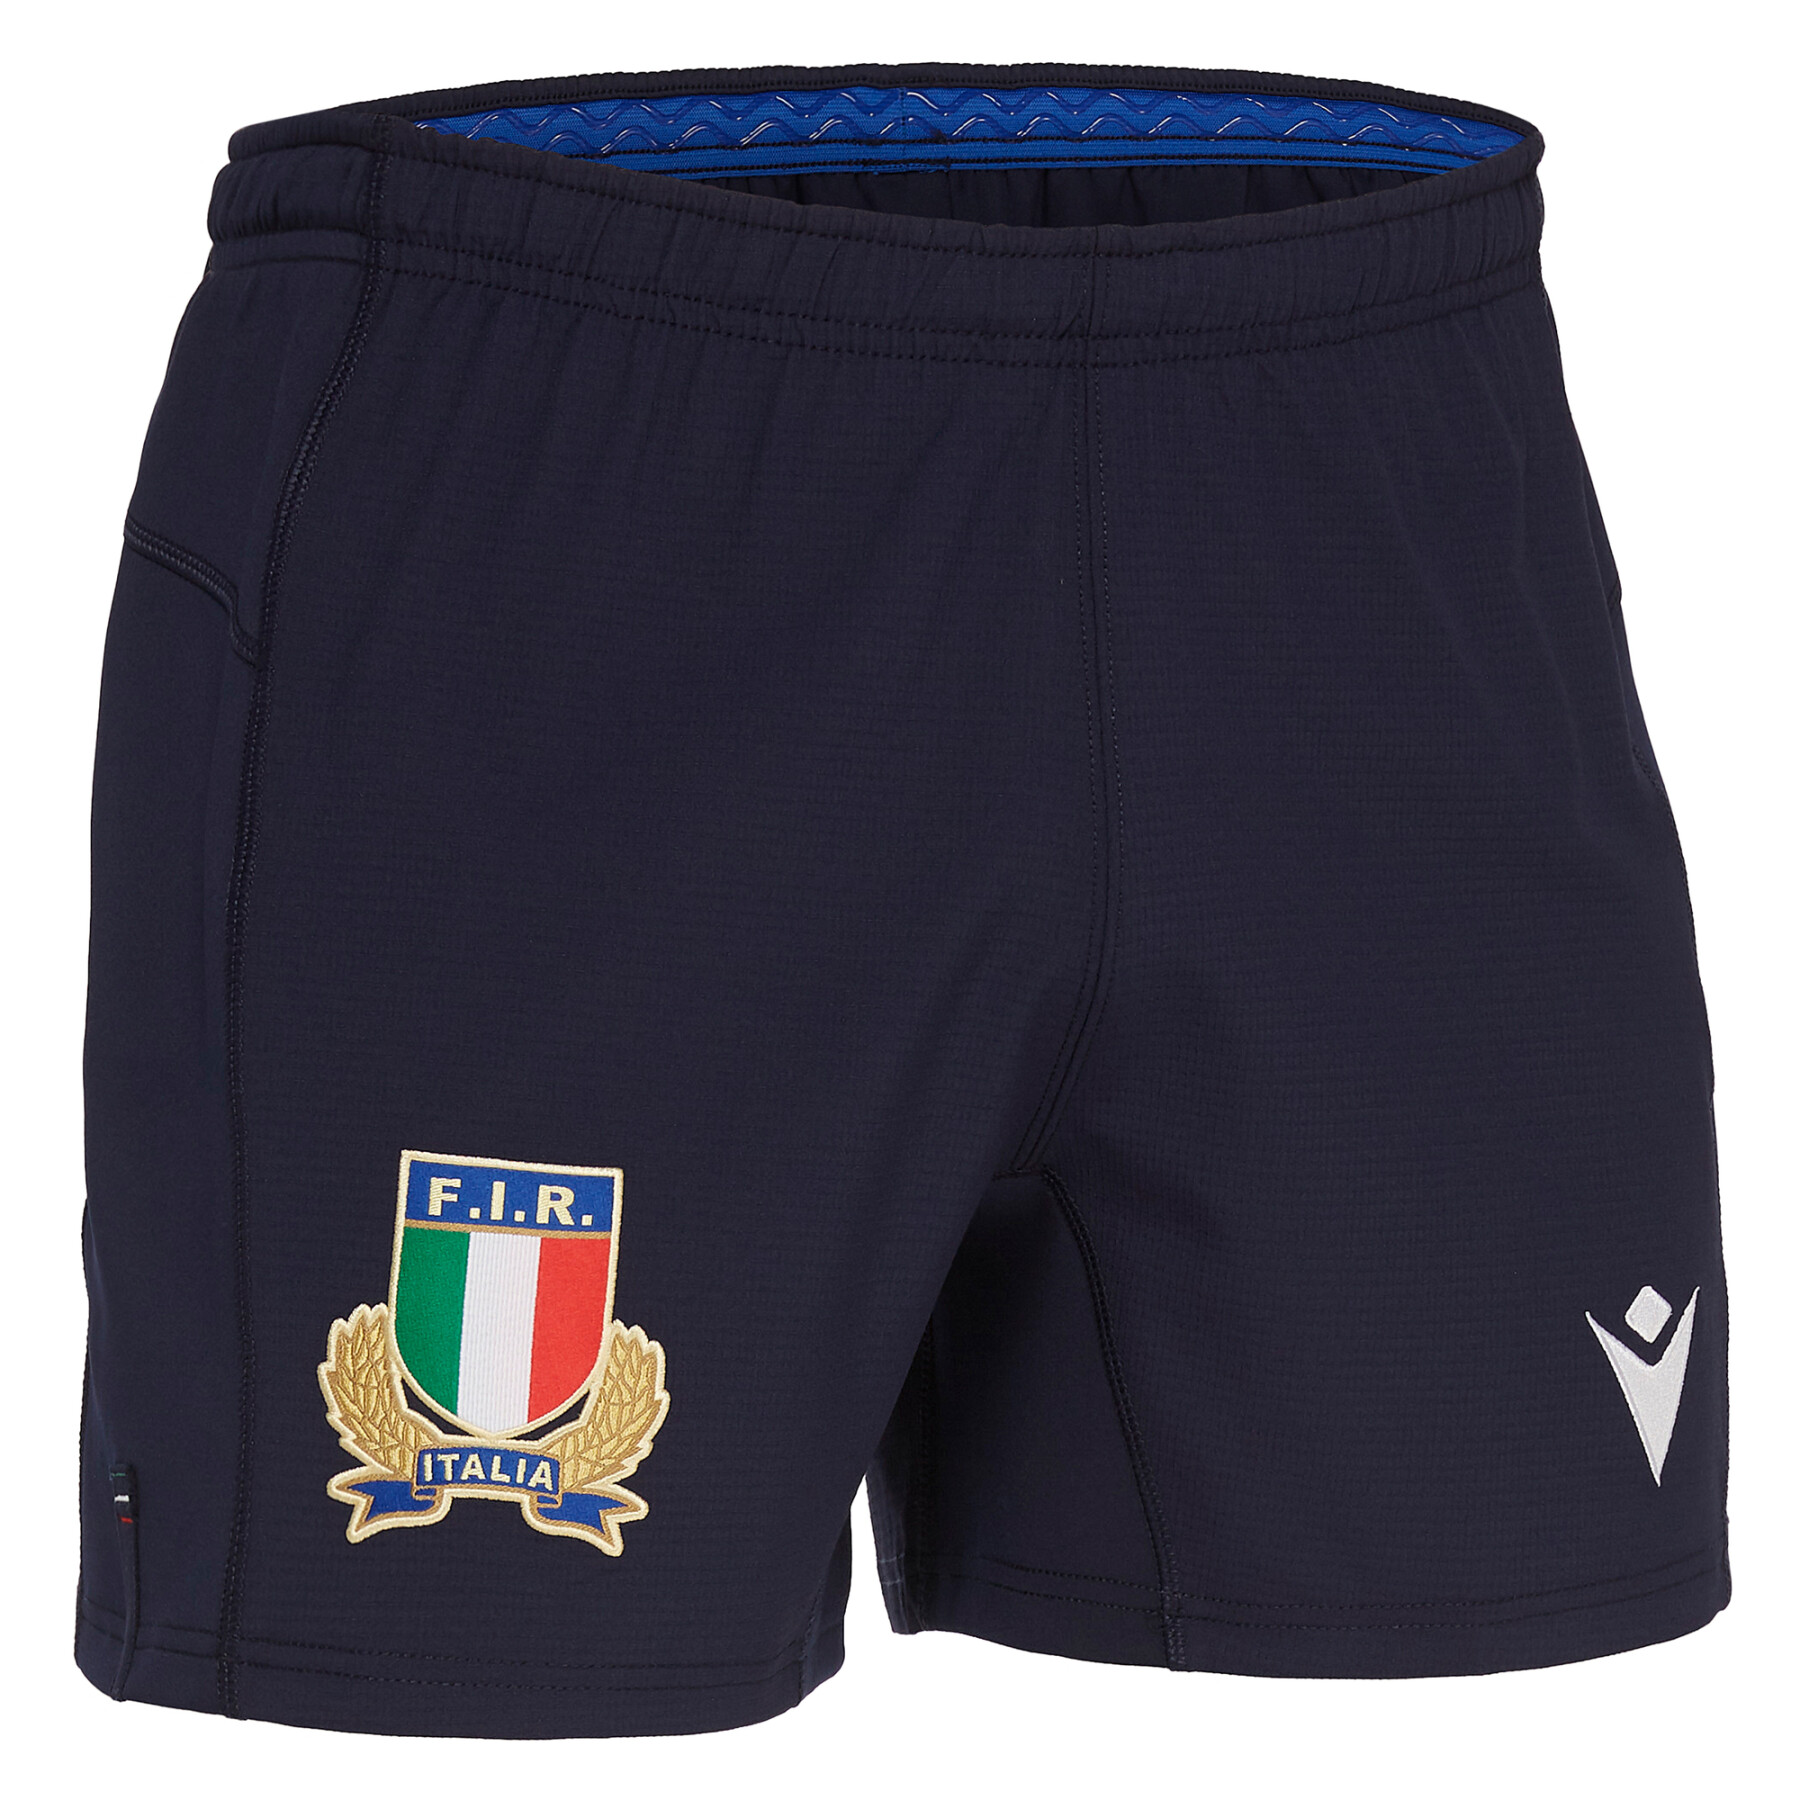 Outdoor shorts Italie rugby 2019